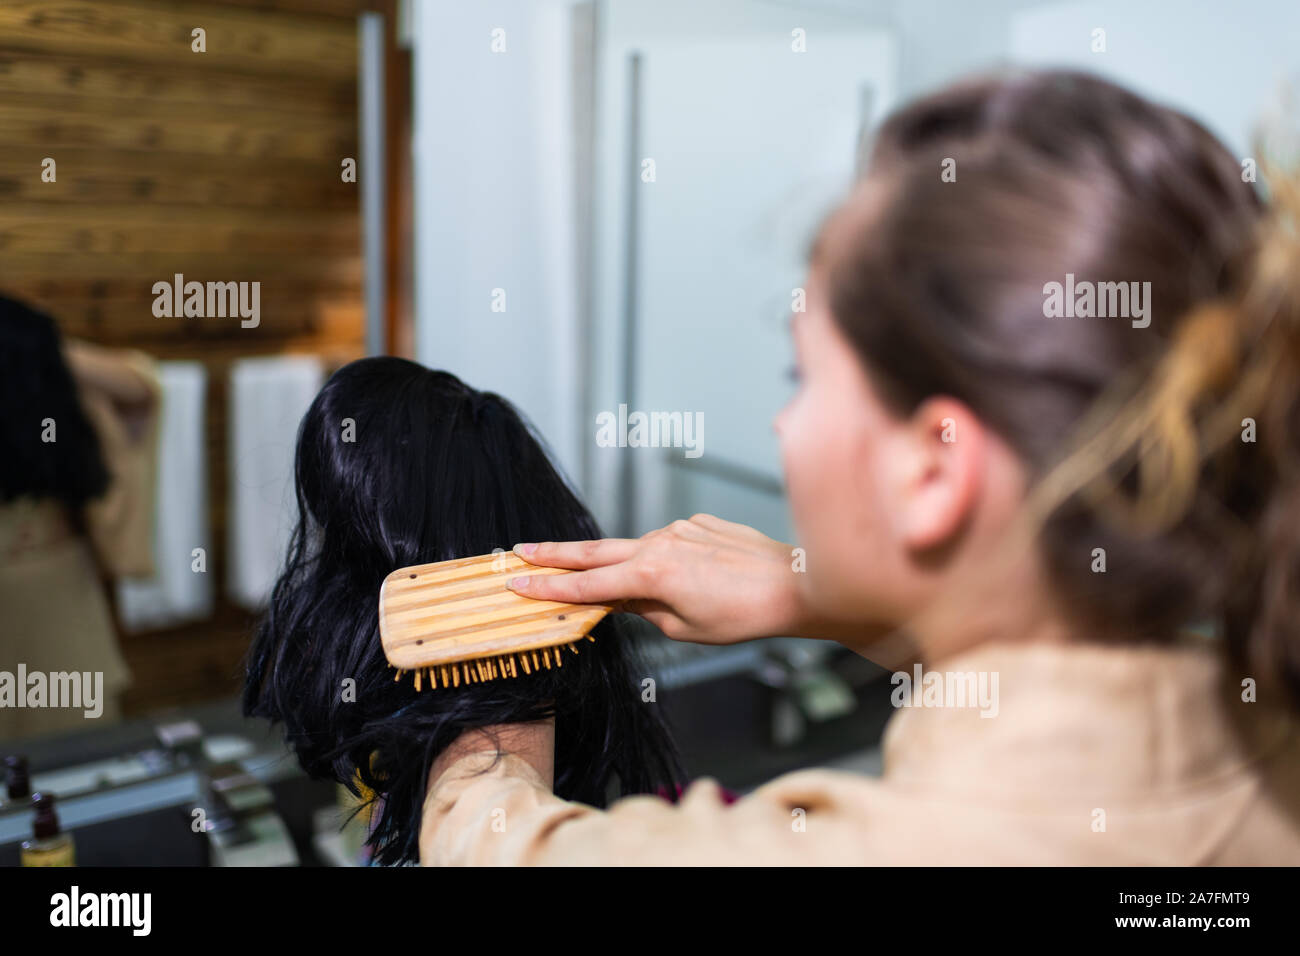 Young woman in kimono getting ready by traditional room brushing holding black wig in Japanese house home Stock Photo